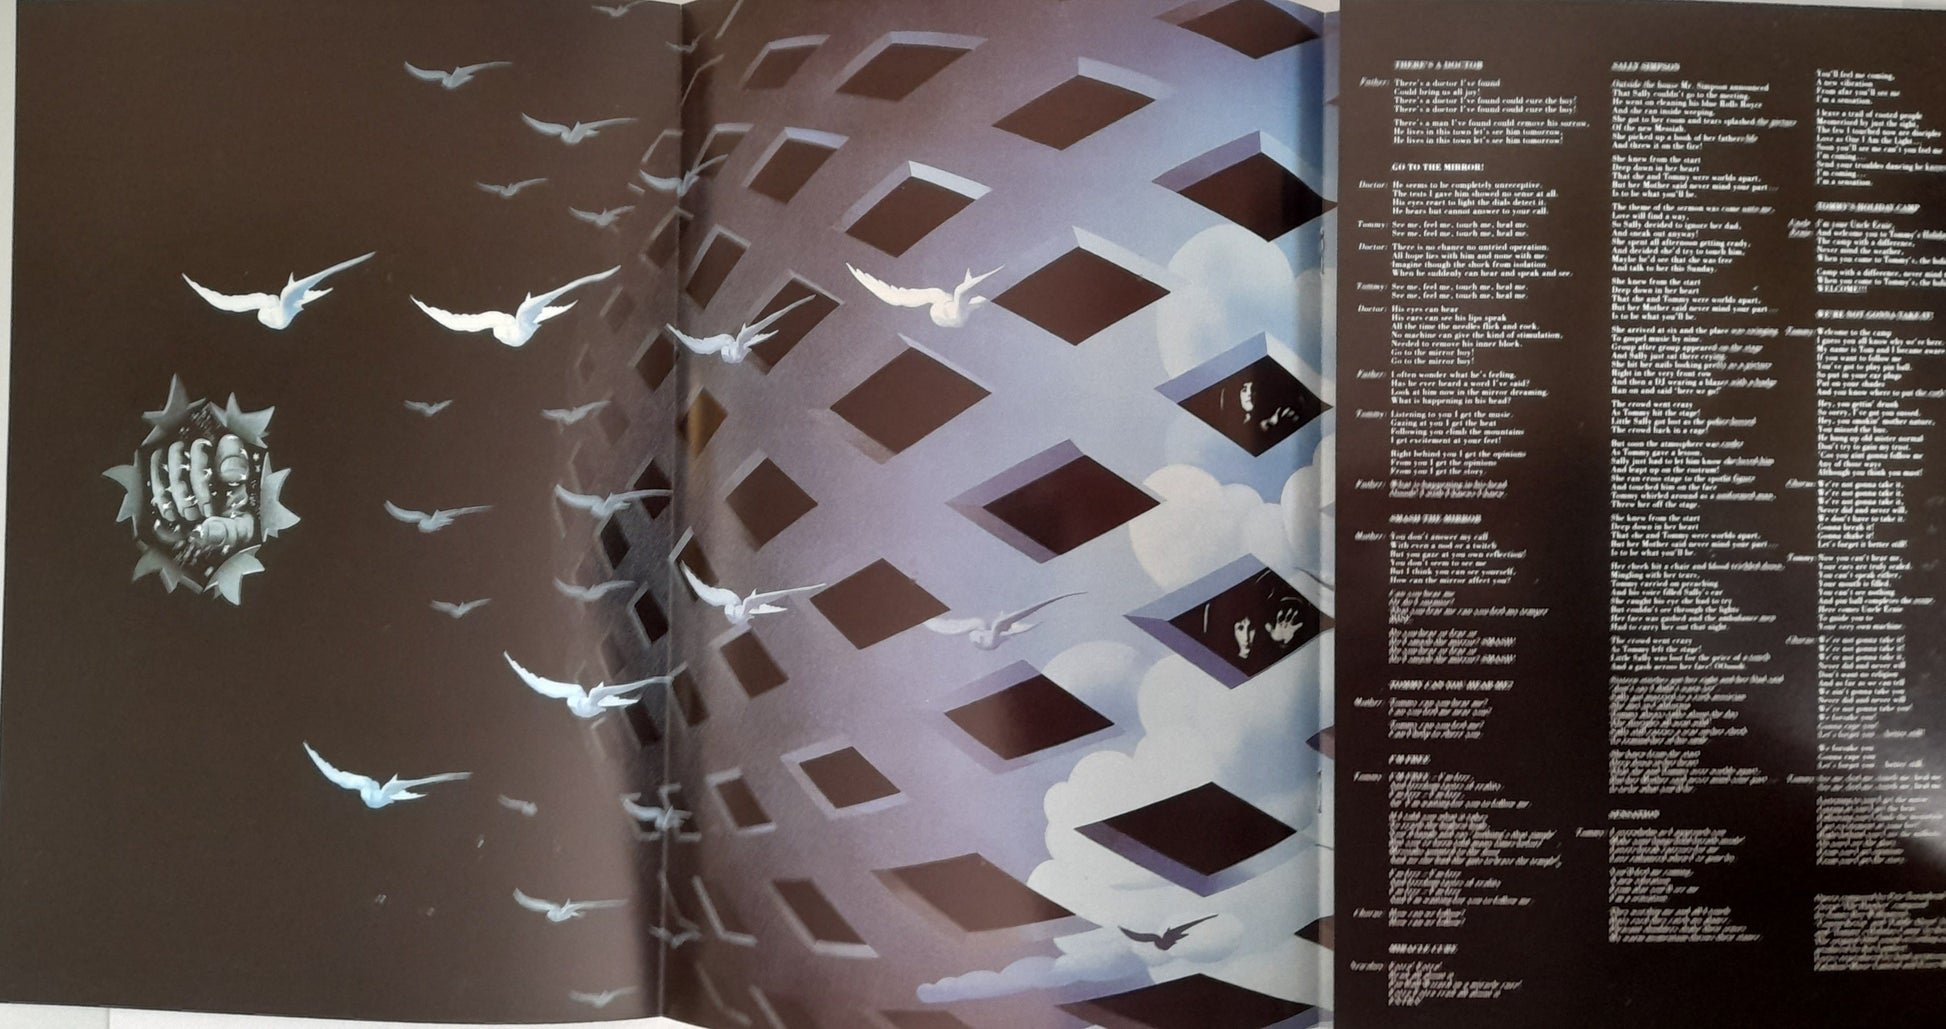 The Who Rock Opera Tommy at the Royal Albert Hall 1989 Concert Programme